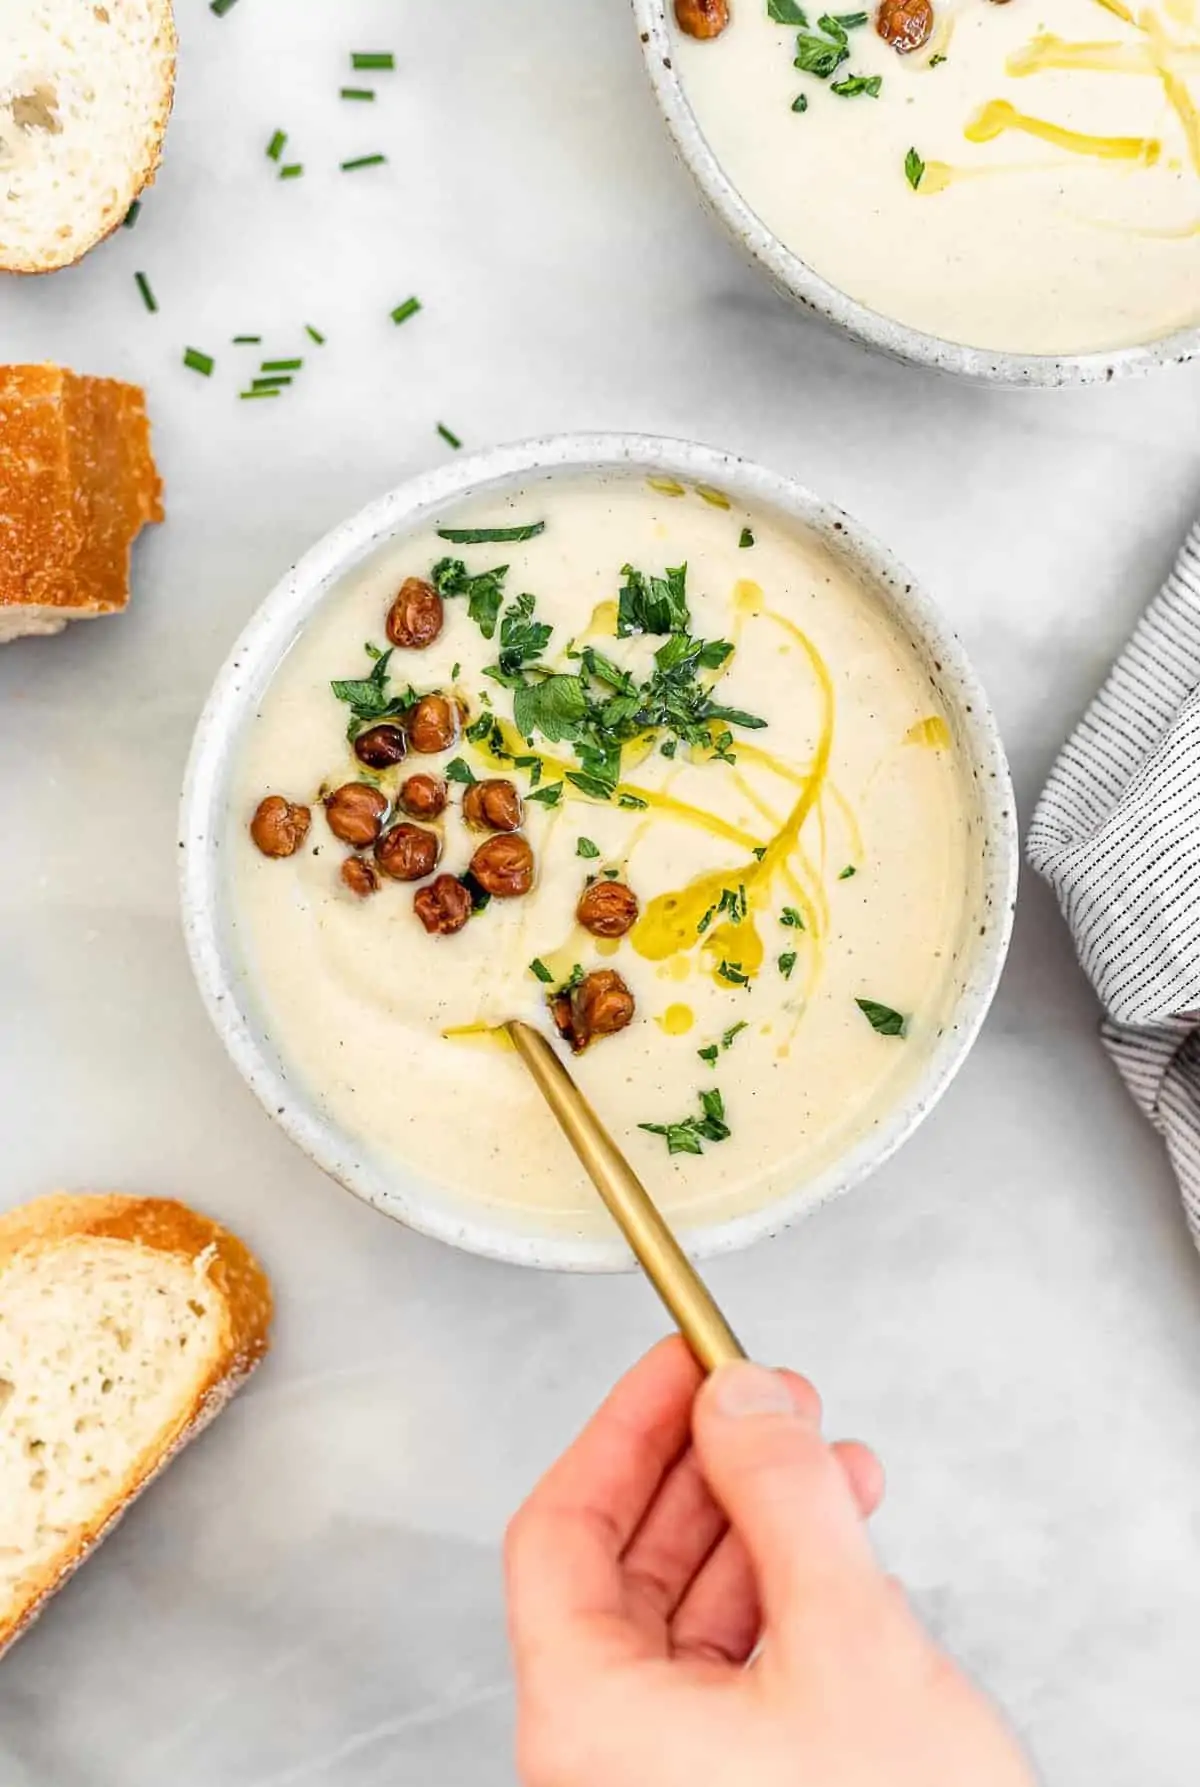 Hand holding a spoon in the bowl of cauliflower soup.